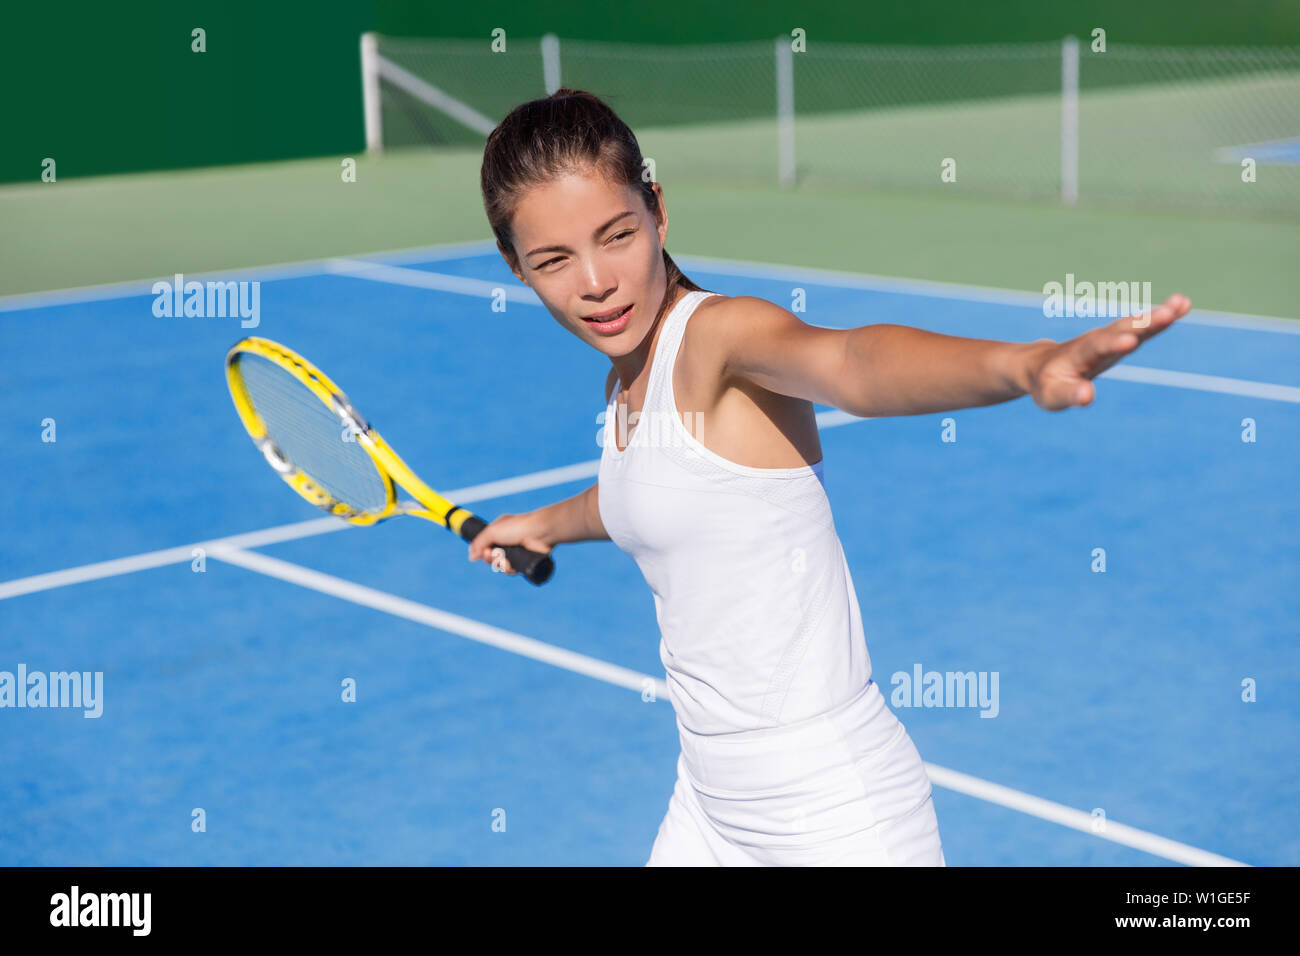 Asian tennis player woman playing hitting forehand in white dress outfit on blue hard court outdoor in summer holding racket. Female athlete determination and concentration concept. Stock Photo